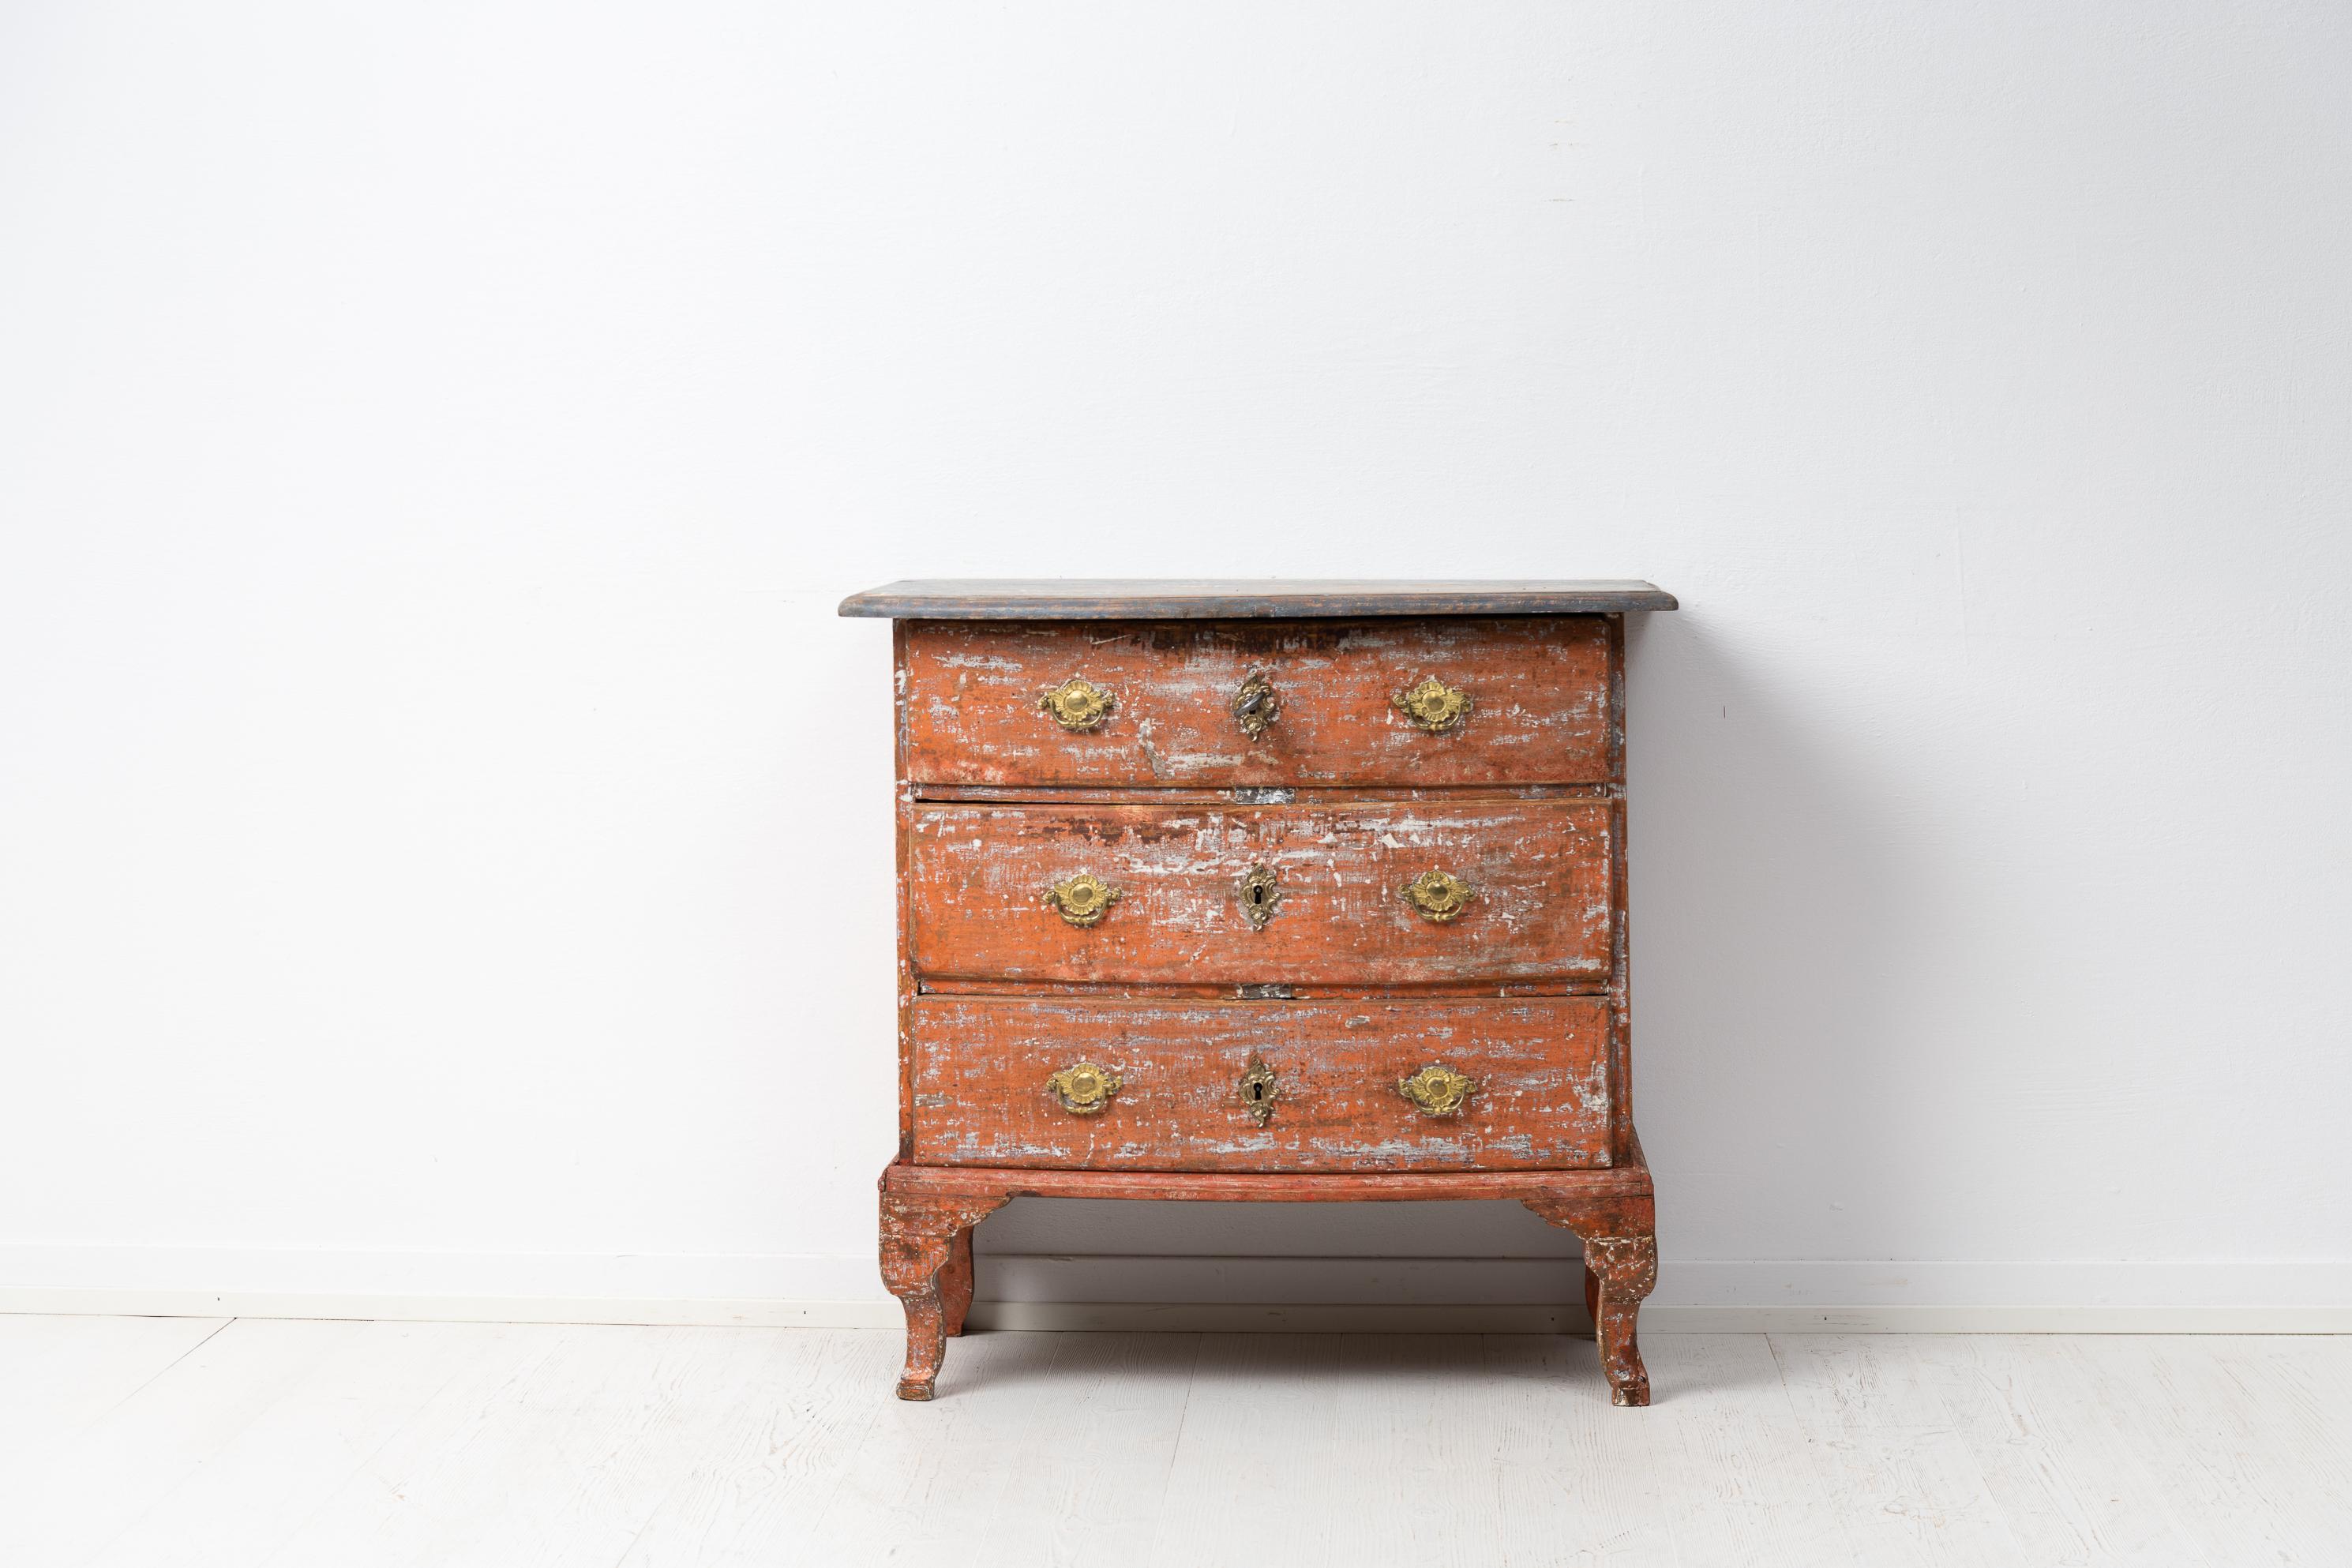 Small Swedish baroque bureau from around 1770. The bureau has three drawers and is made in painted pine which has been dry scraped by hand to the original paint. The original salmon-toned paint has patina and distress and the pine underneath shines